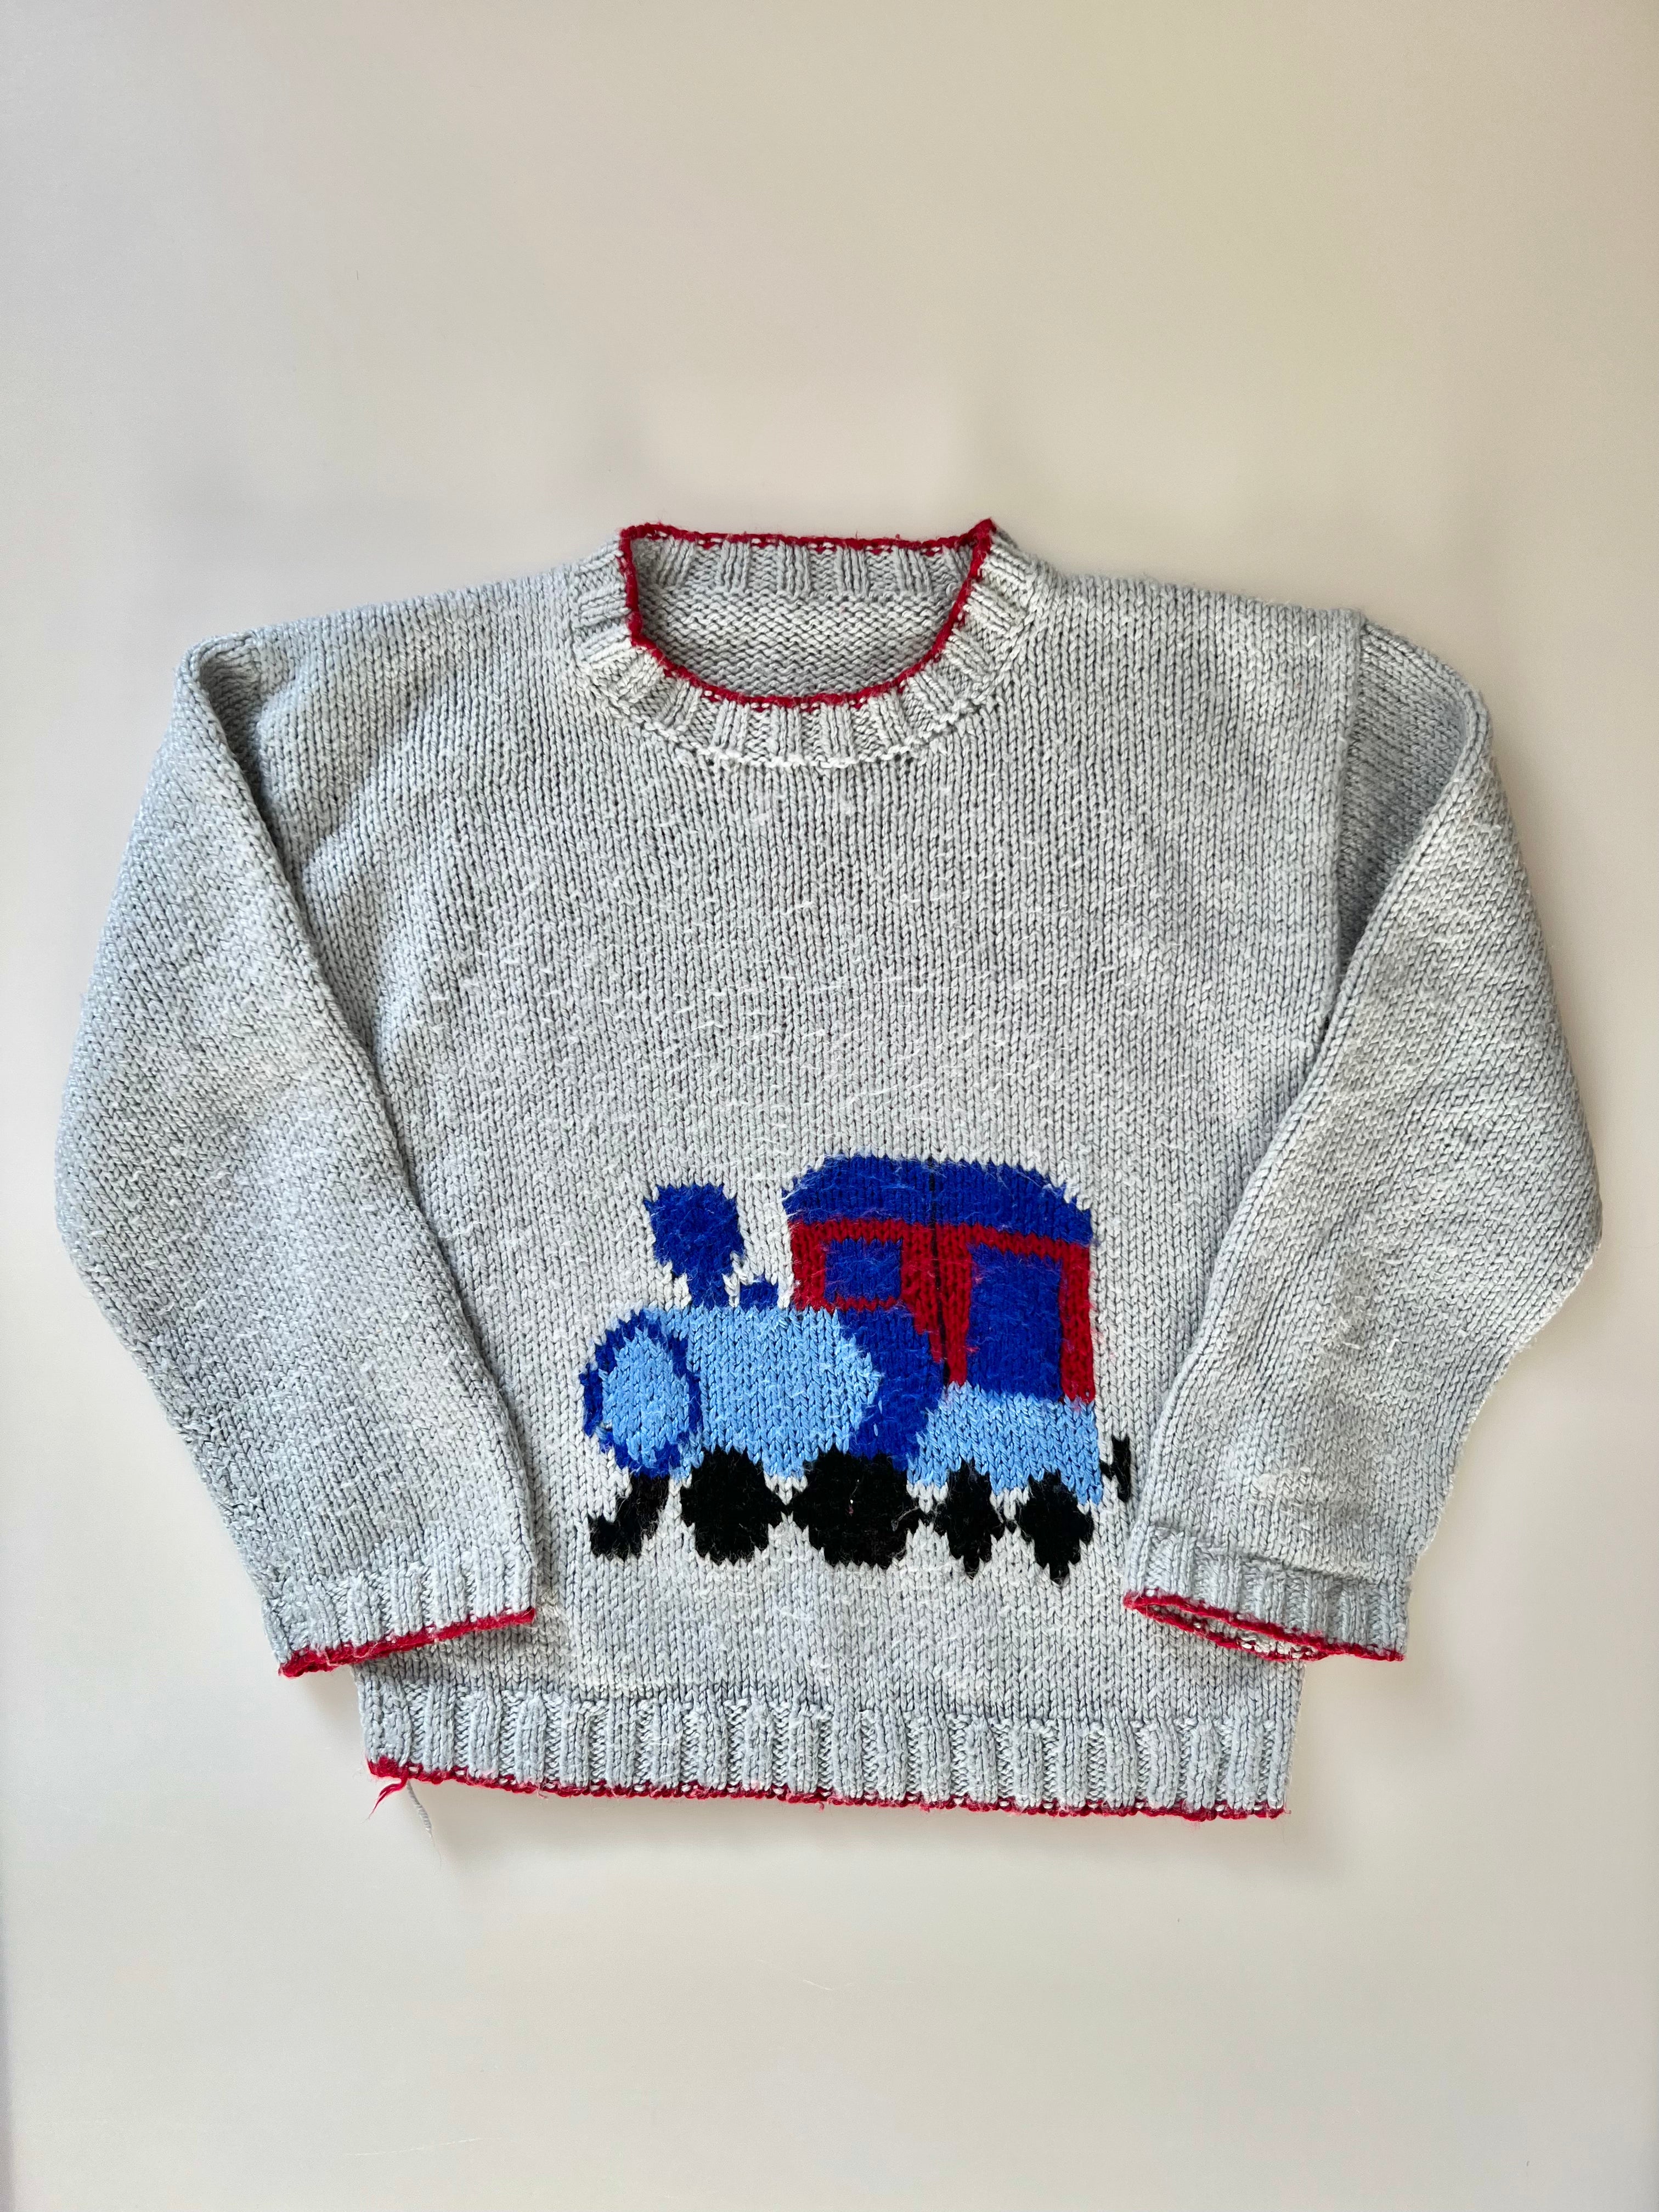 Hand Knitted Train Jumper Age 4-6